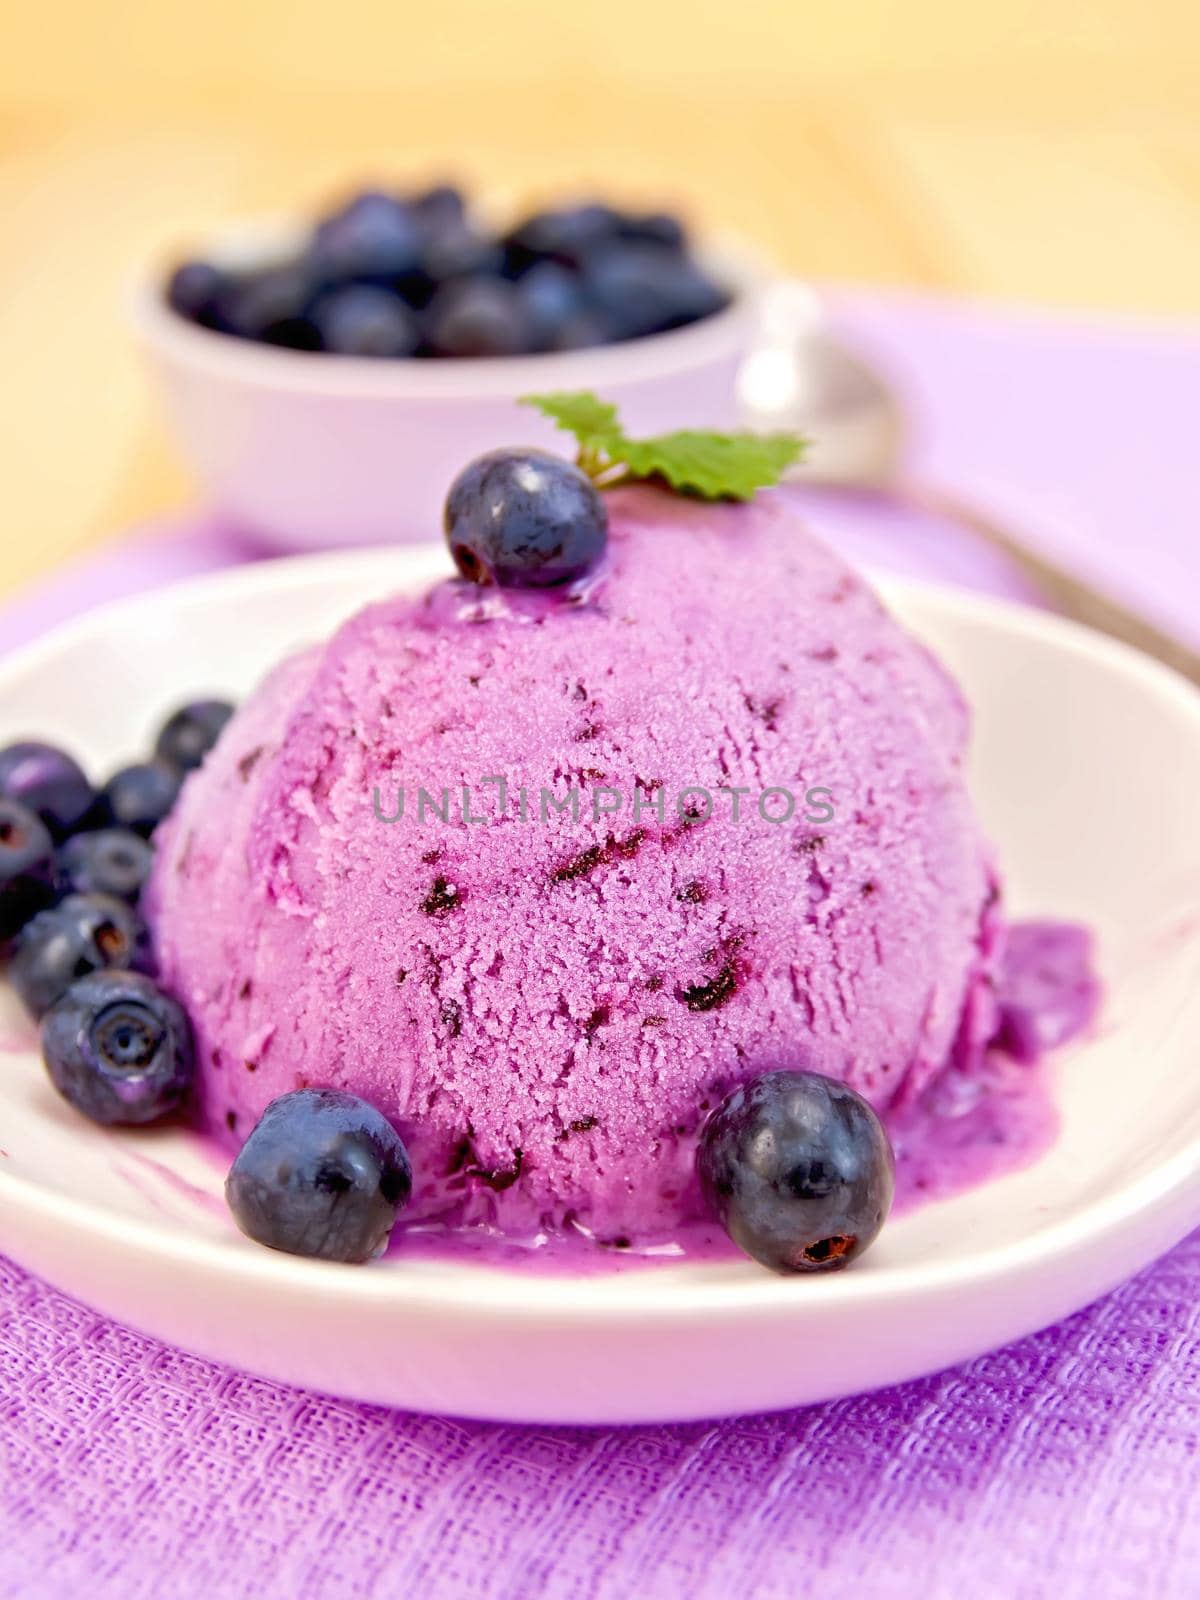 Blueberry ice cream with mint and berries in a bowl, a bowl of blueberries on a background of purple cloth and wooden planks